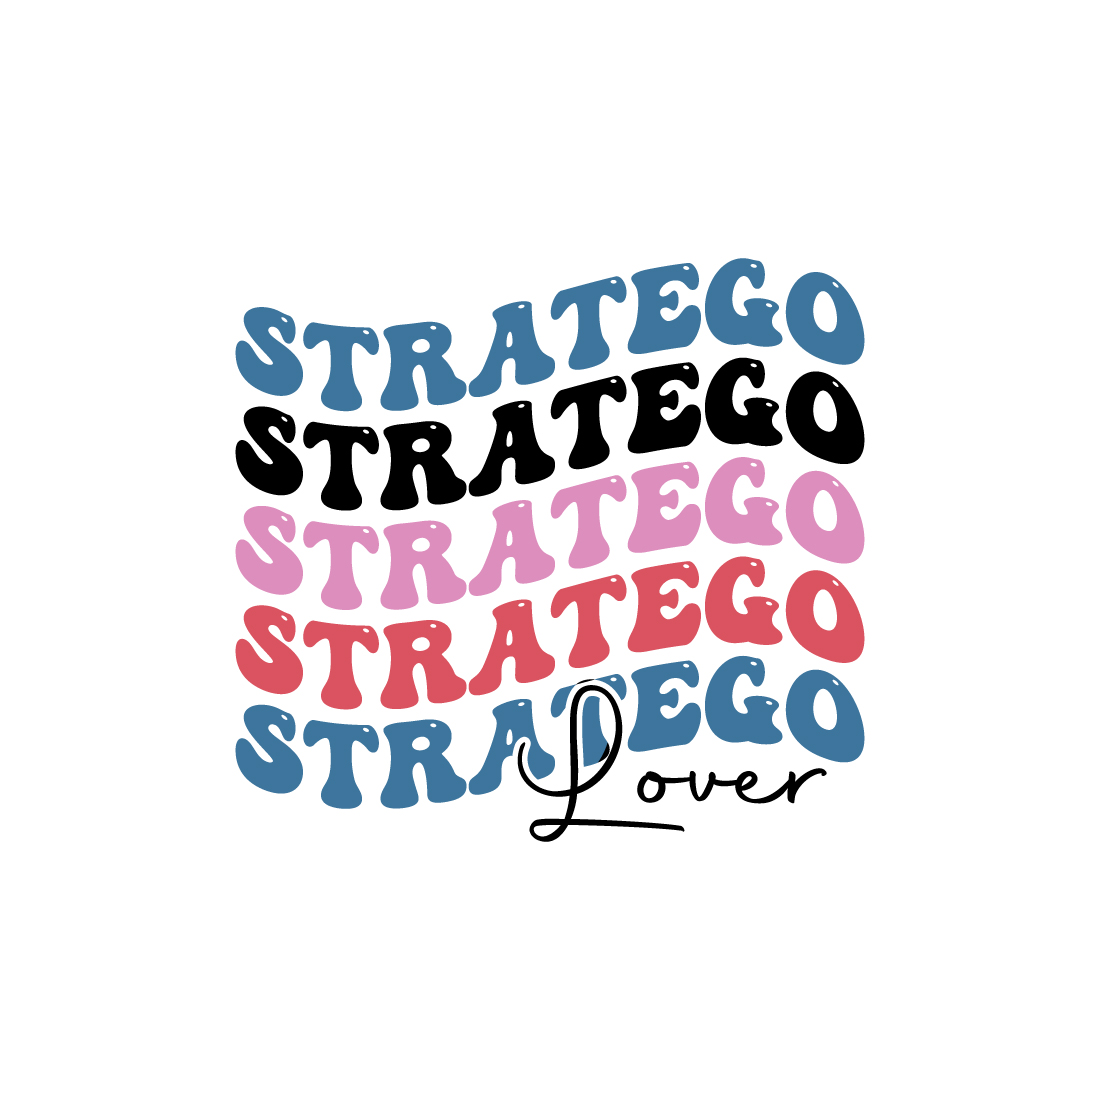 stratego lover indoor game retro typography design for t-shirts, cards, frame artwork, phone cases, bags, mugs, stickers, tumblers, print, etc preview image.